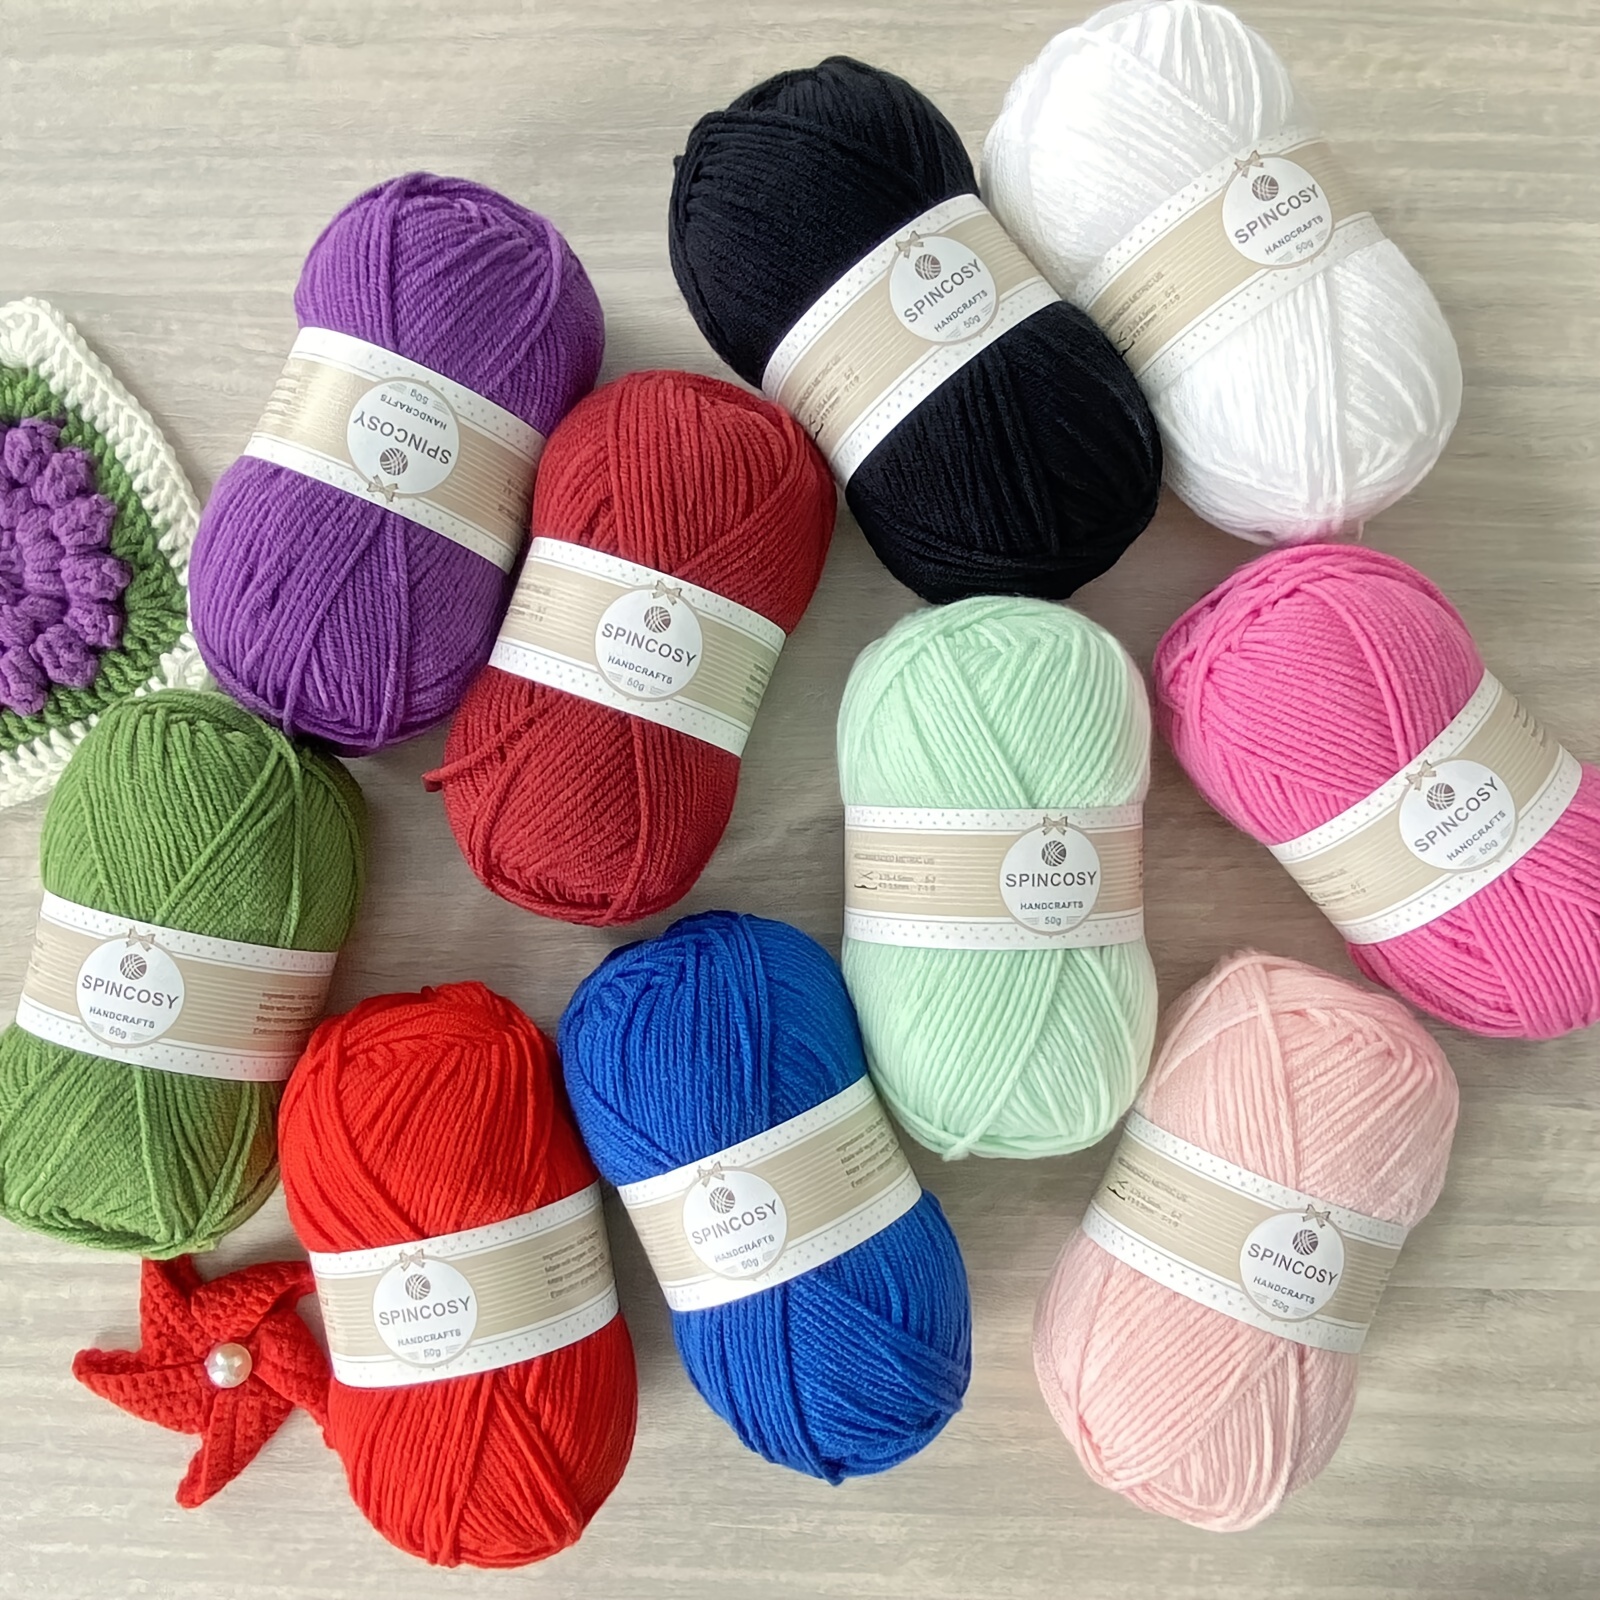 2 Pcs 100g Cotton Acrylic Yarn for Crocheting,Soft and Fluffy Crochet Yarn  for Knitting and Crafts，4 ply Warm Yarn for DIY Slippers Cushions Dolls